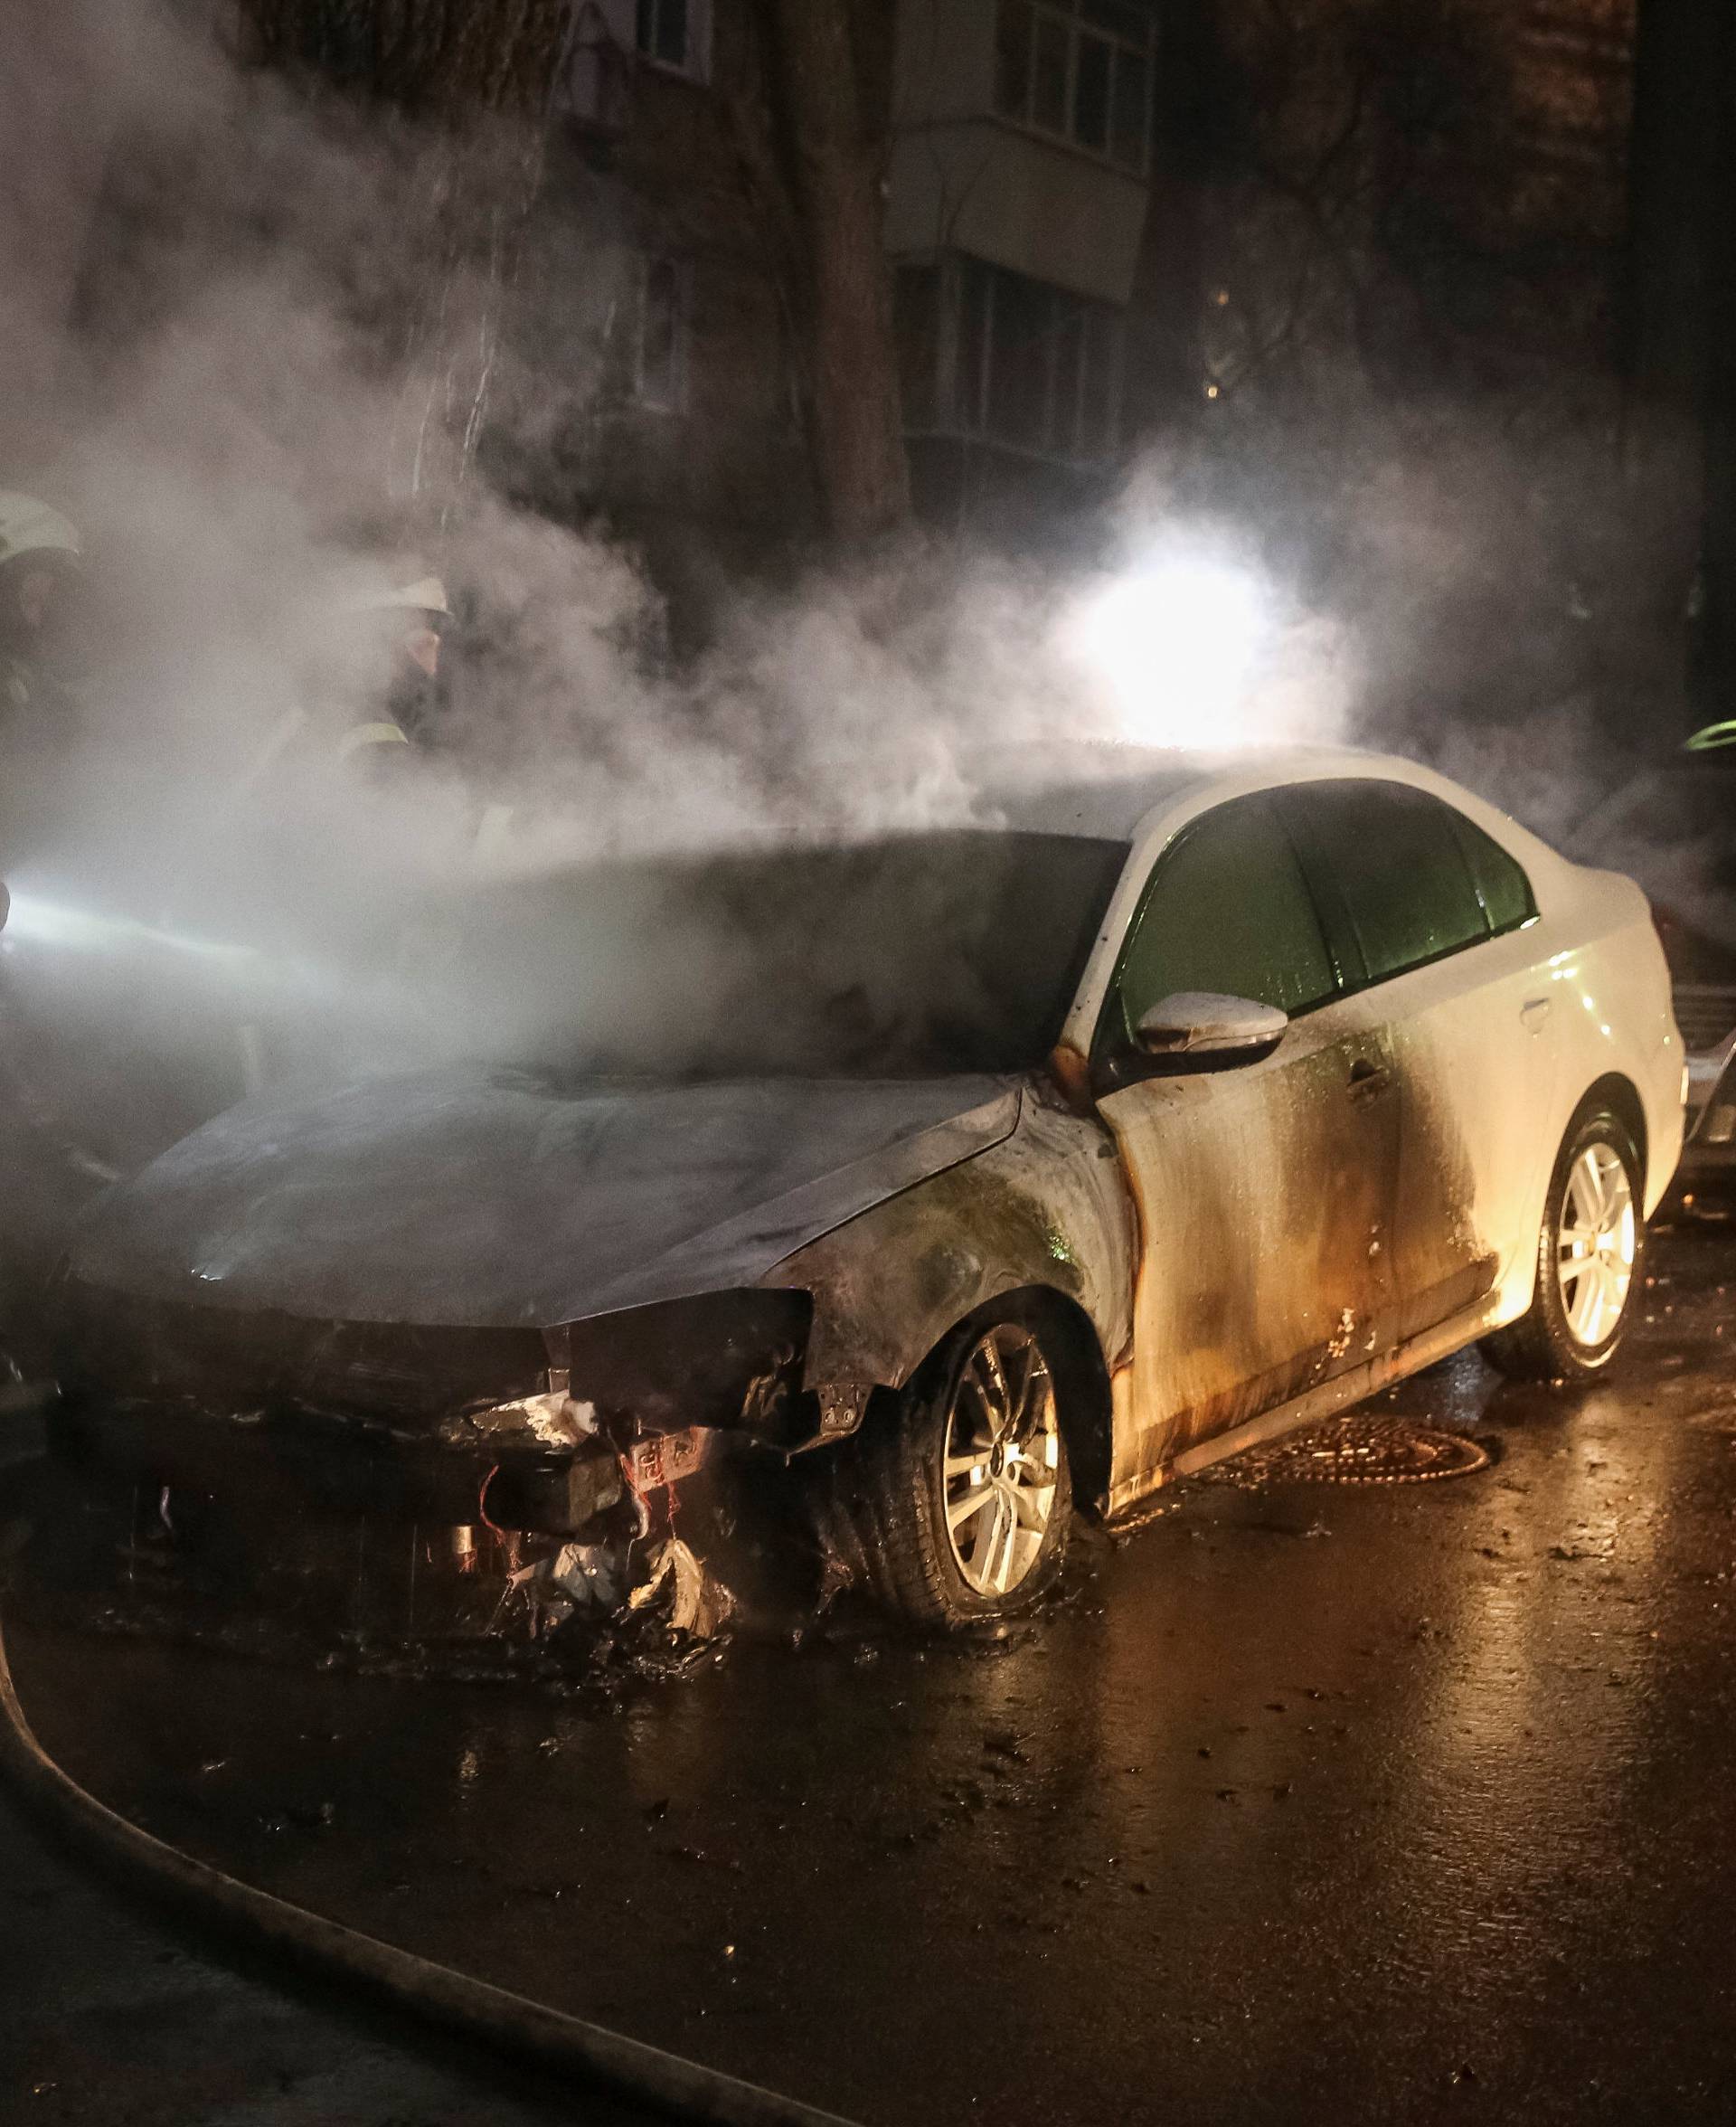 Firefighters extinguish a burning car of the embassy of Russia after a rally against the seizure by Russian special forces of three of the Ukrainian navy ships in the Black Sea, in front of the Russian embassy in Kiev